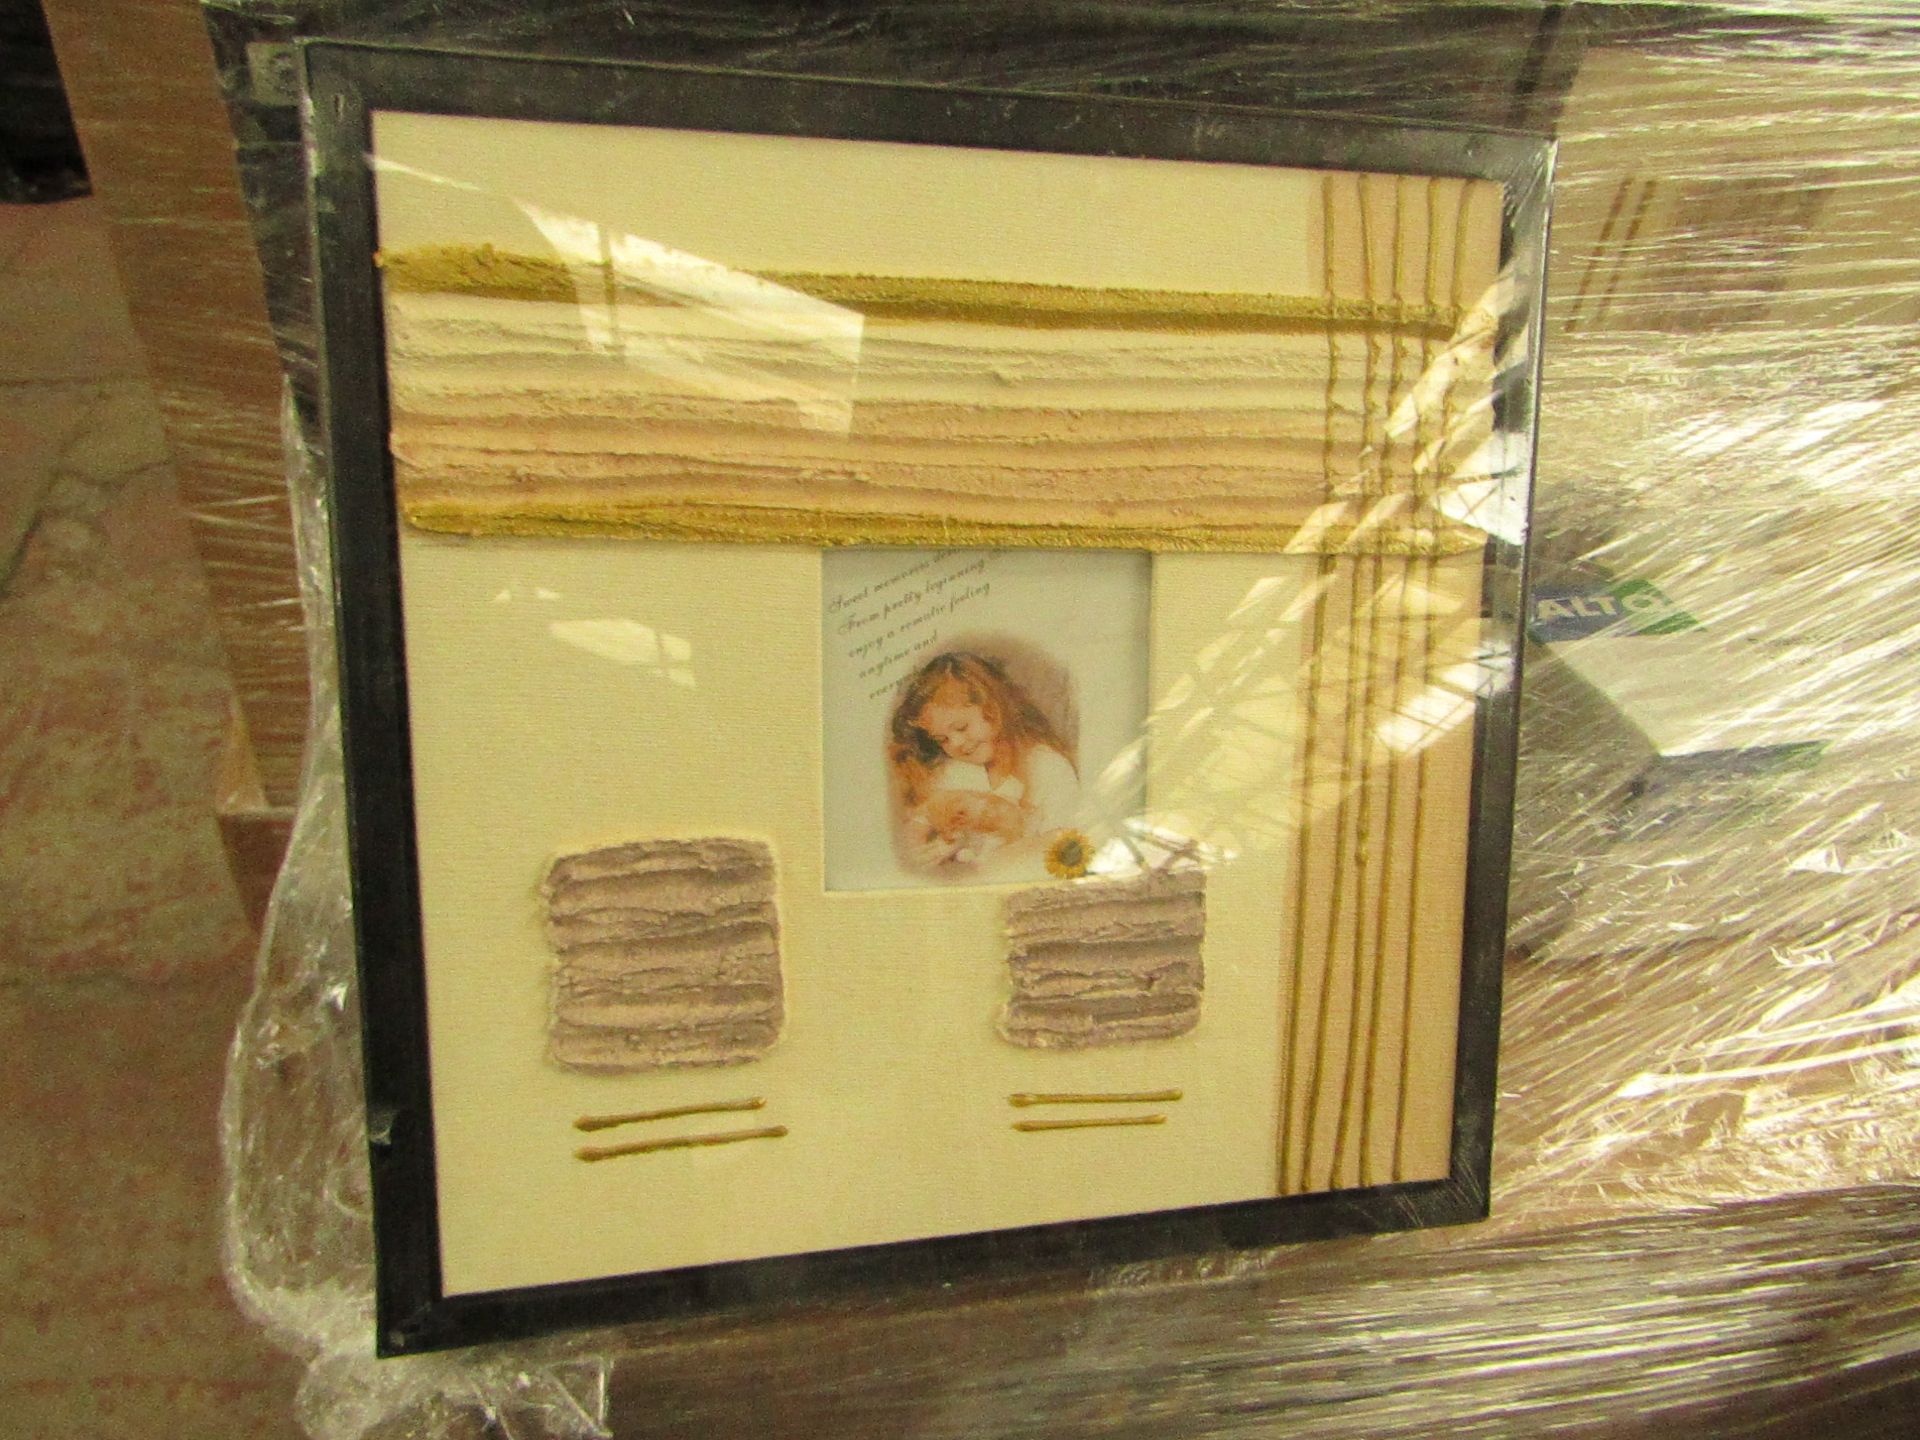 4x Erno - Picture Frames Various Designs - Picked At Random - All New & Packaged.